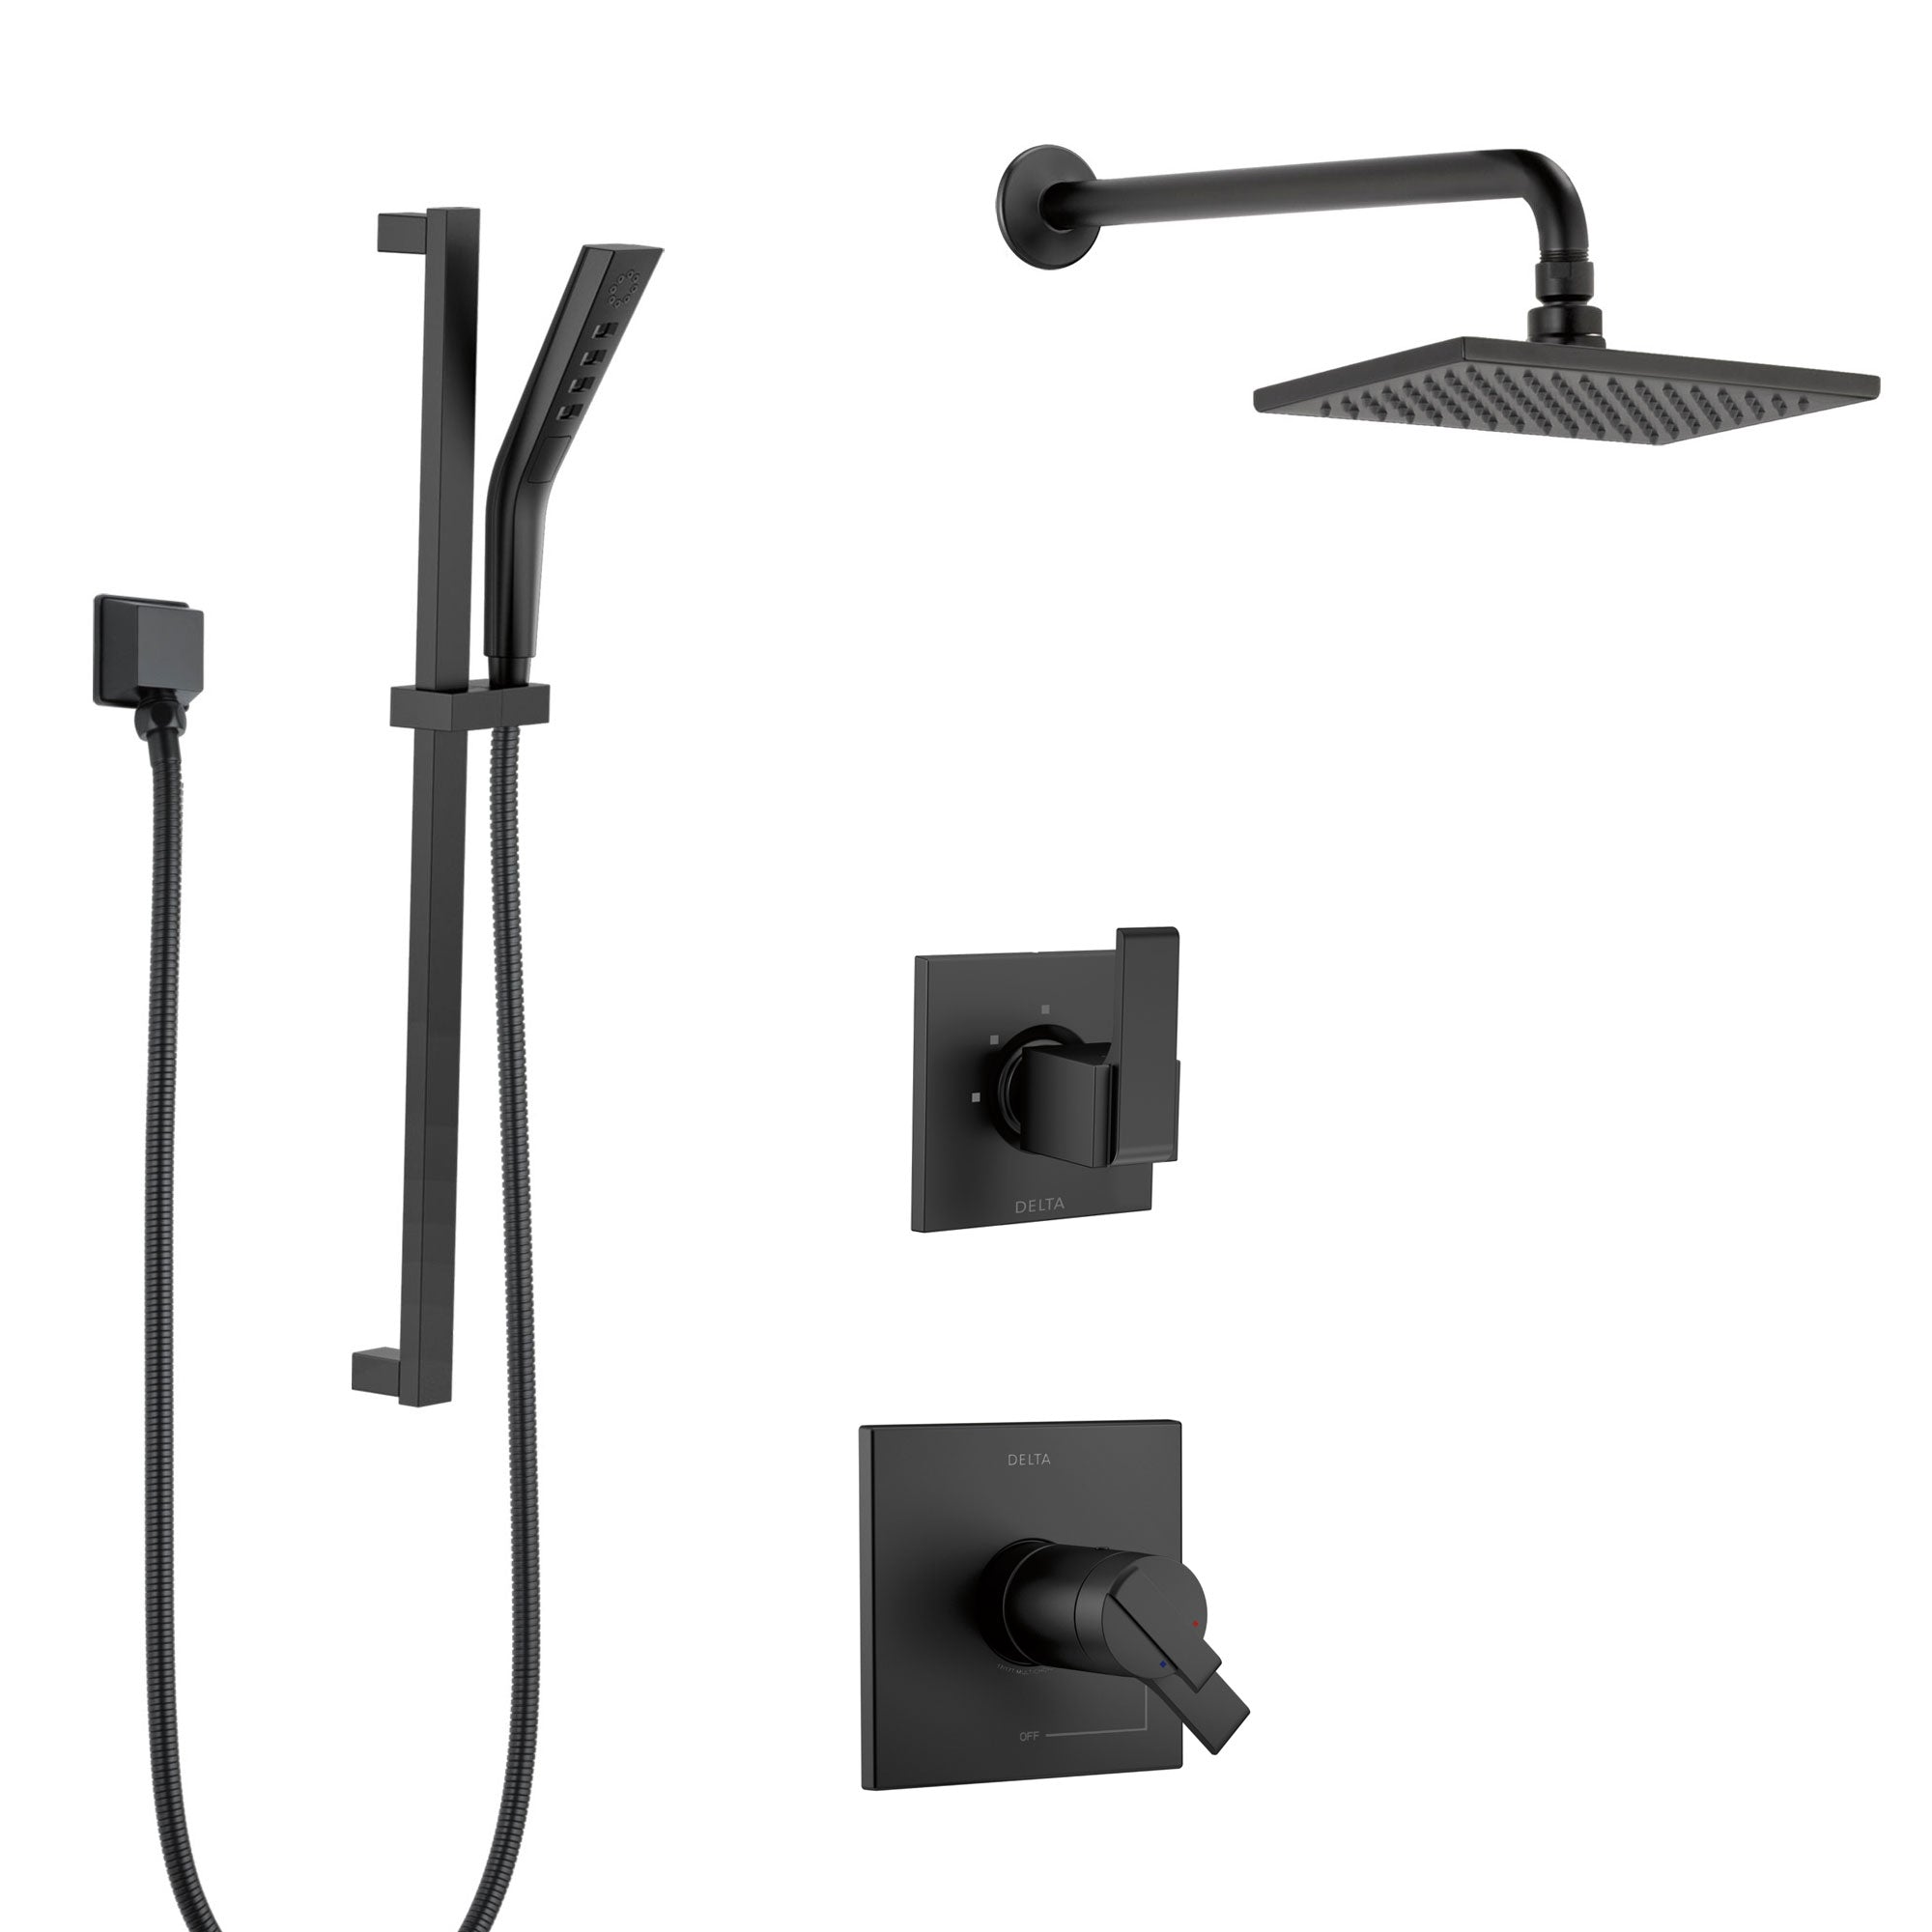 Delta Ara Matte Black Finish Modern Thermostatic Shower System with Large Wall Mounted Rain Showerhead and Hand Shower on Slidebar SS17T673BL4